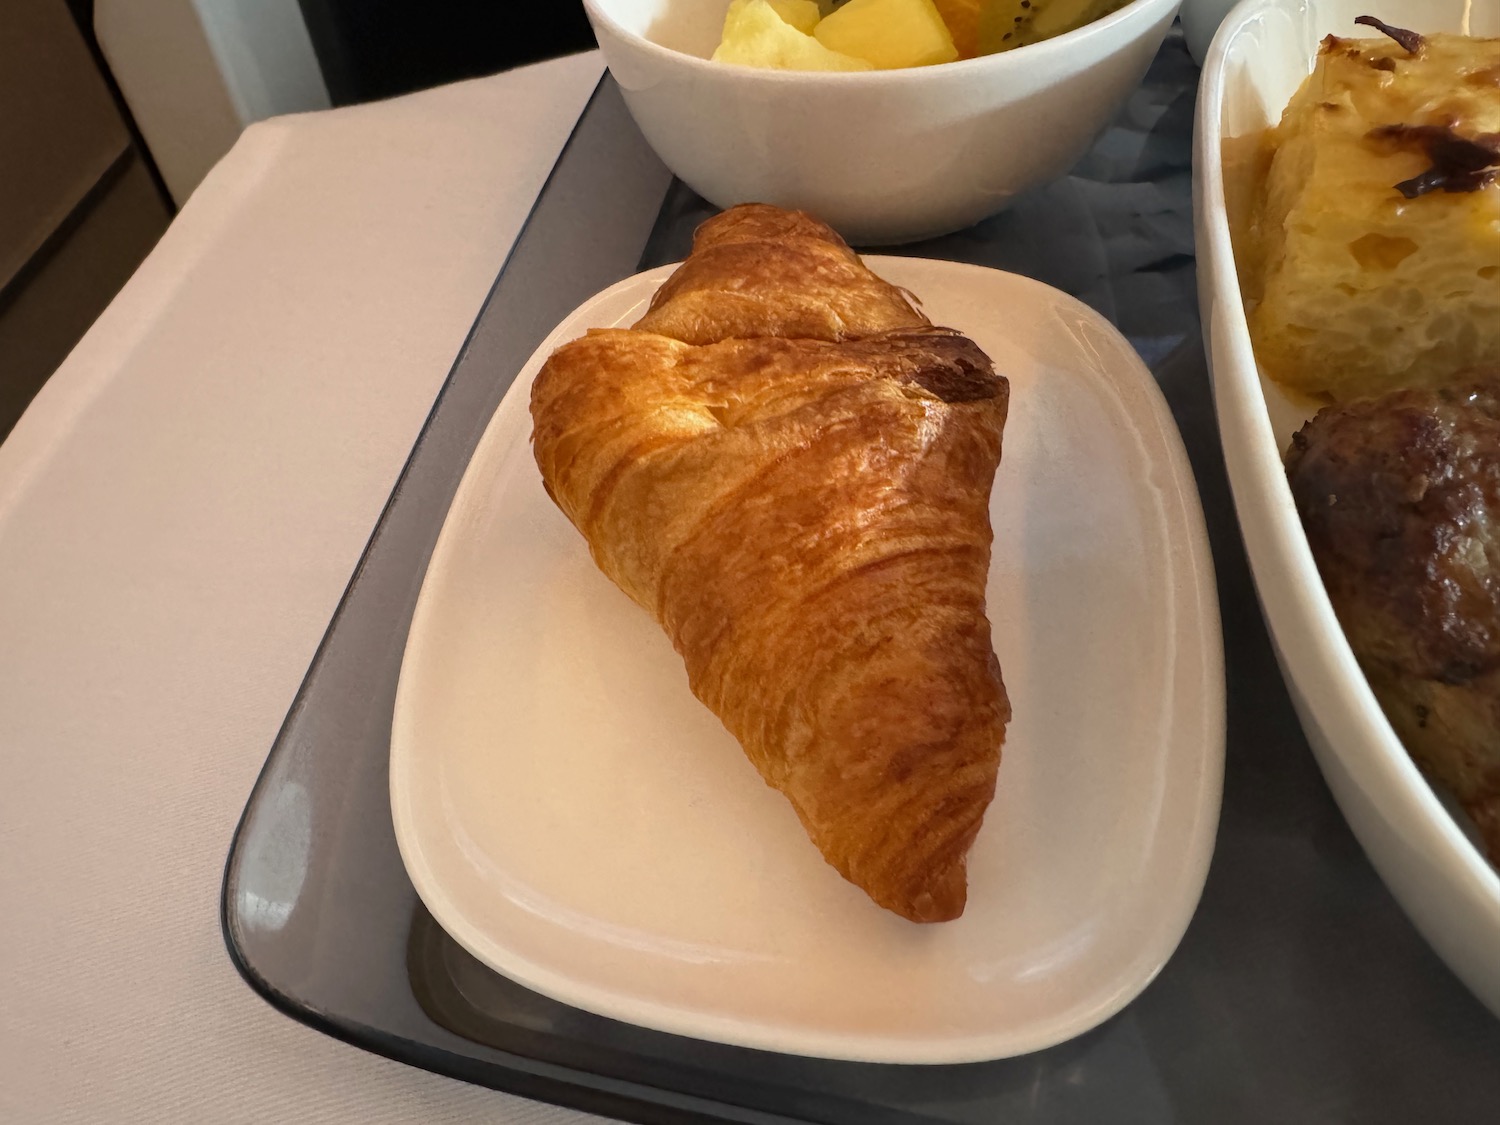 a croissant on a plate next to a bowl of fruit